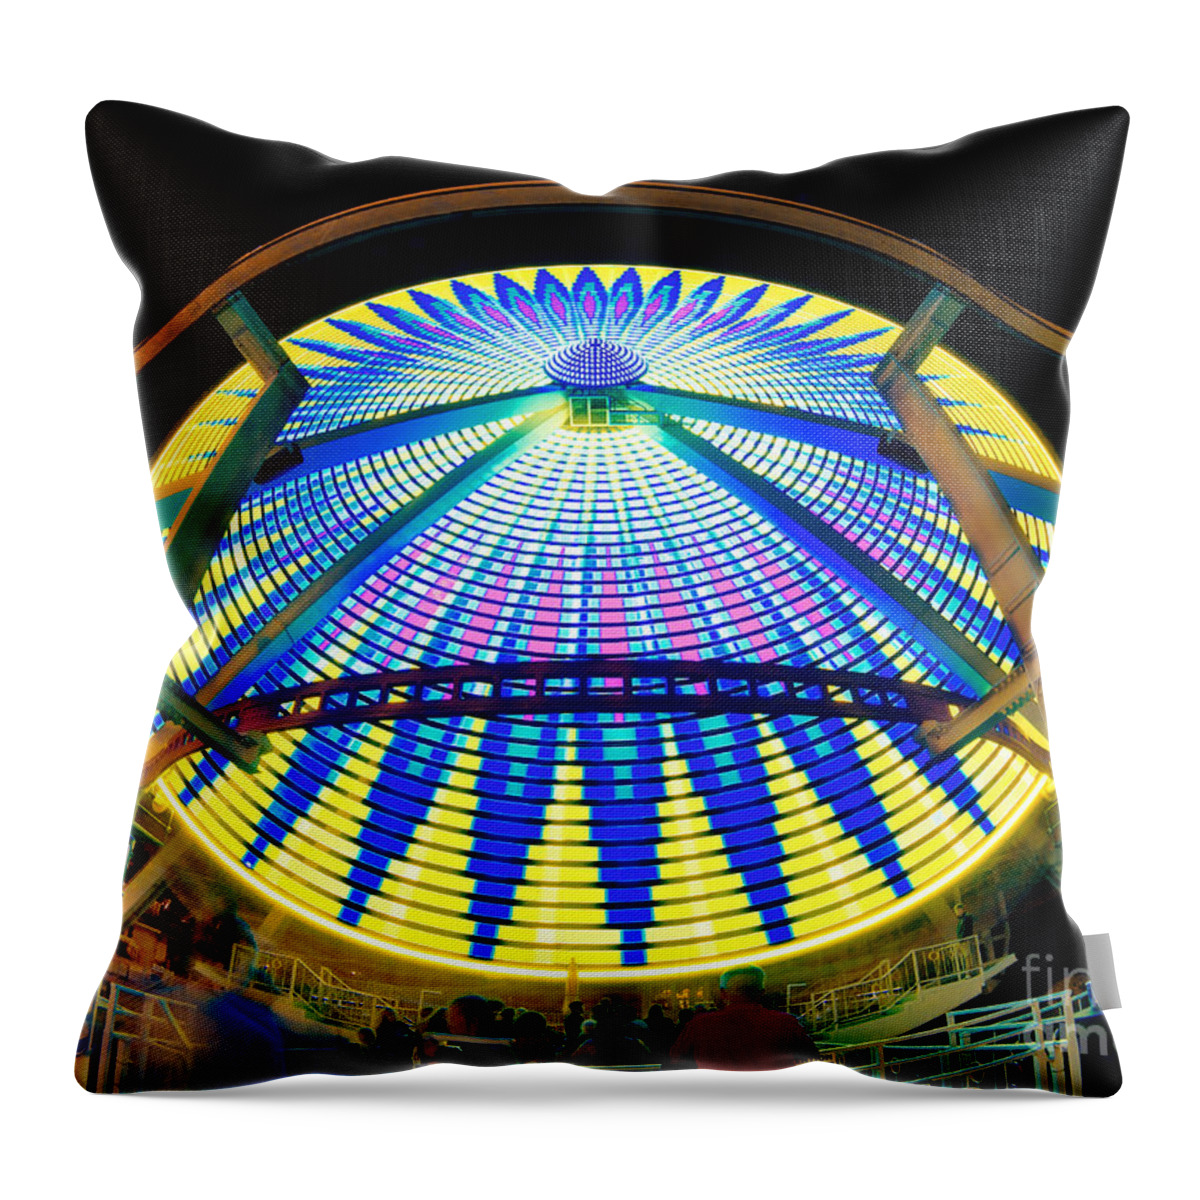 Big Wheel Throw Pillow featuring the photograph Big Wheel Keep On Turning by Mark Miller